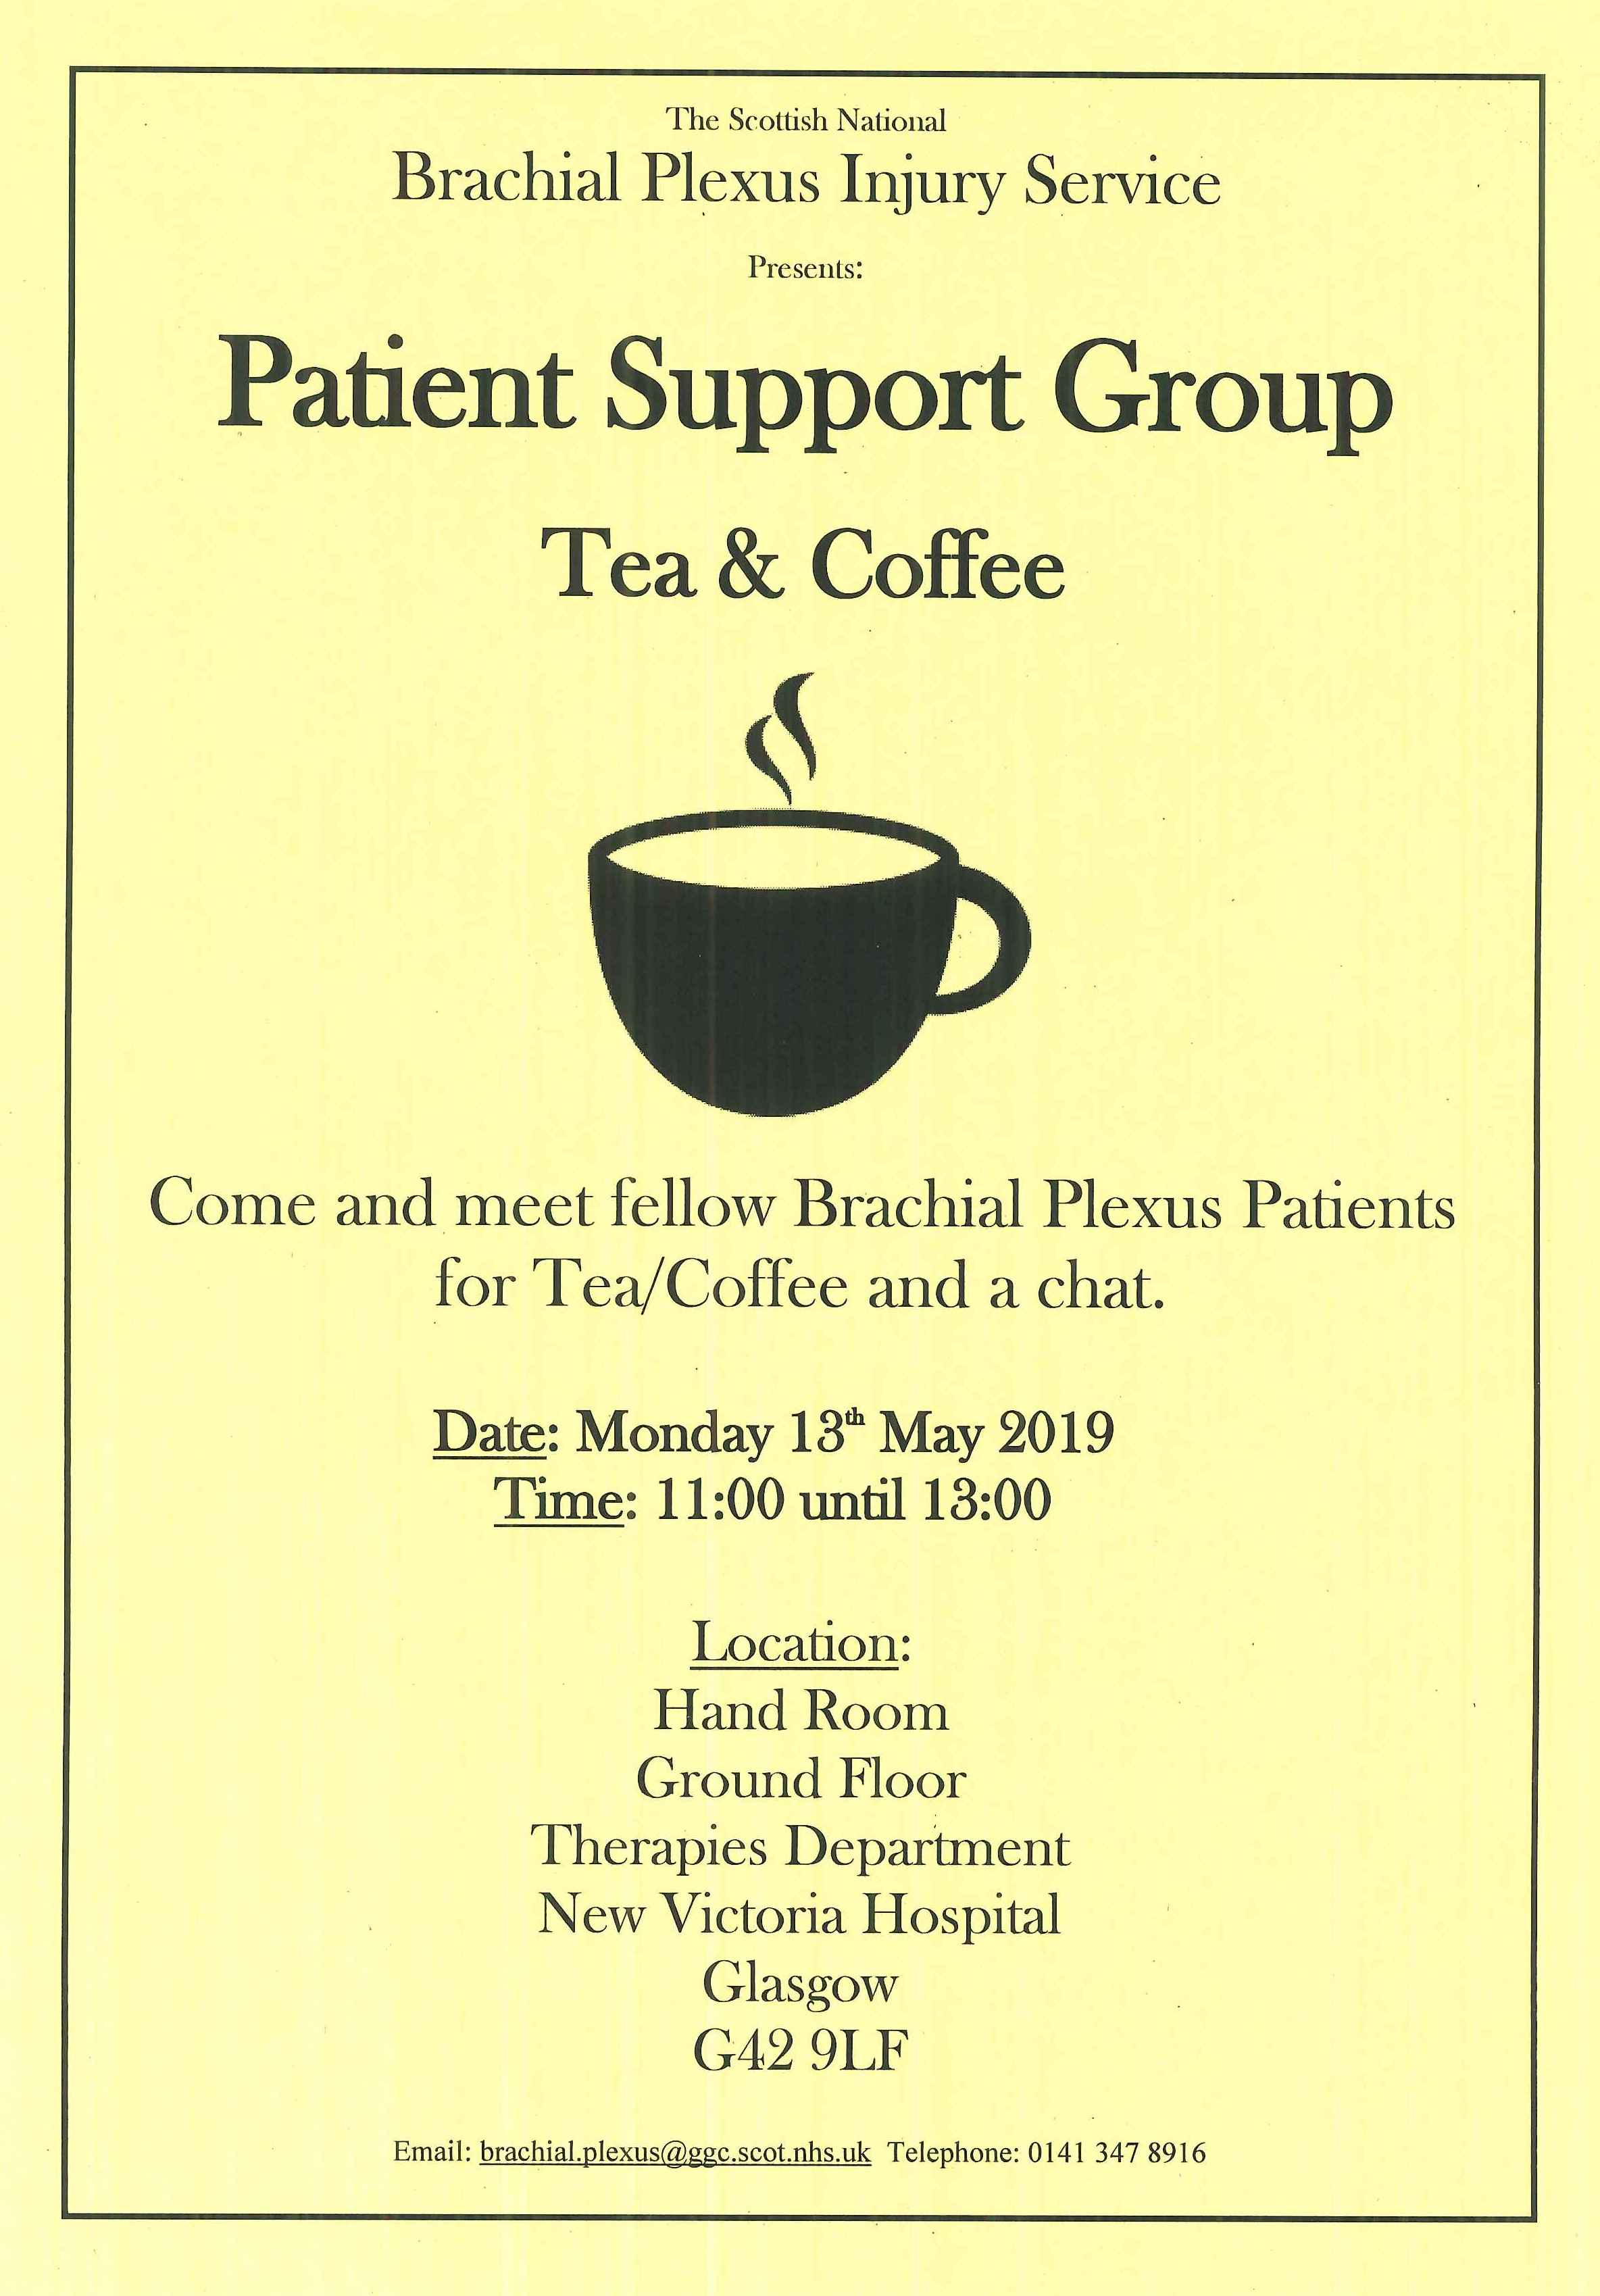 Patient Support Group Poster